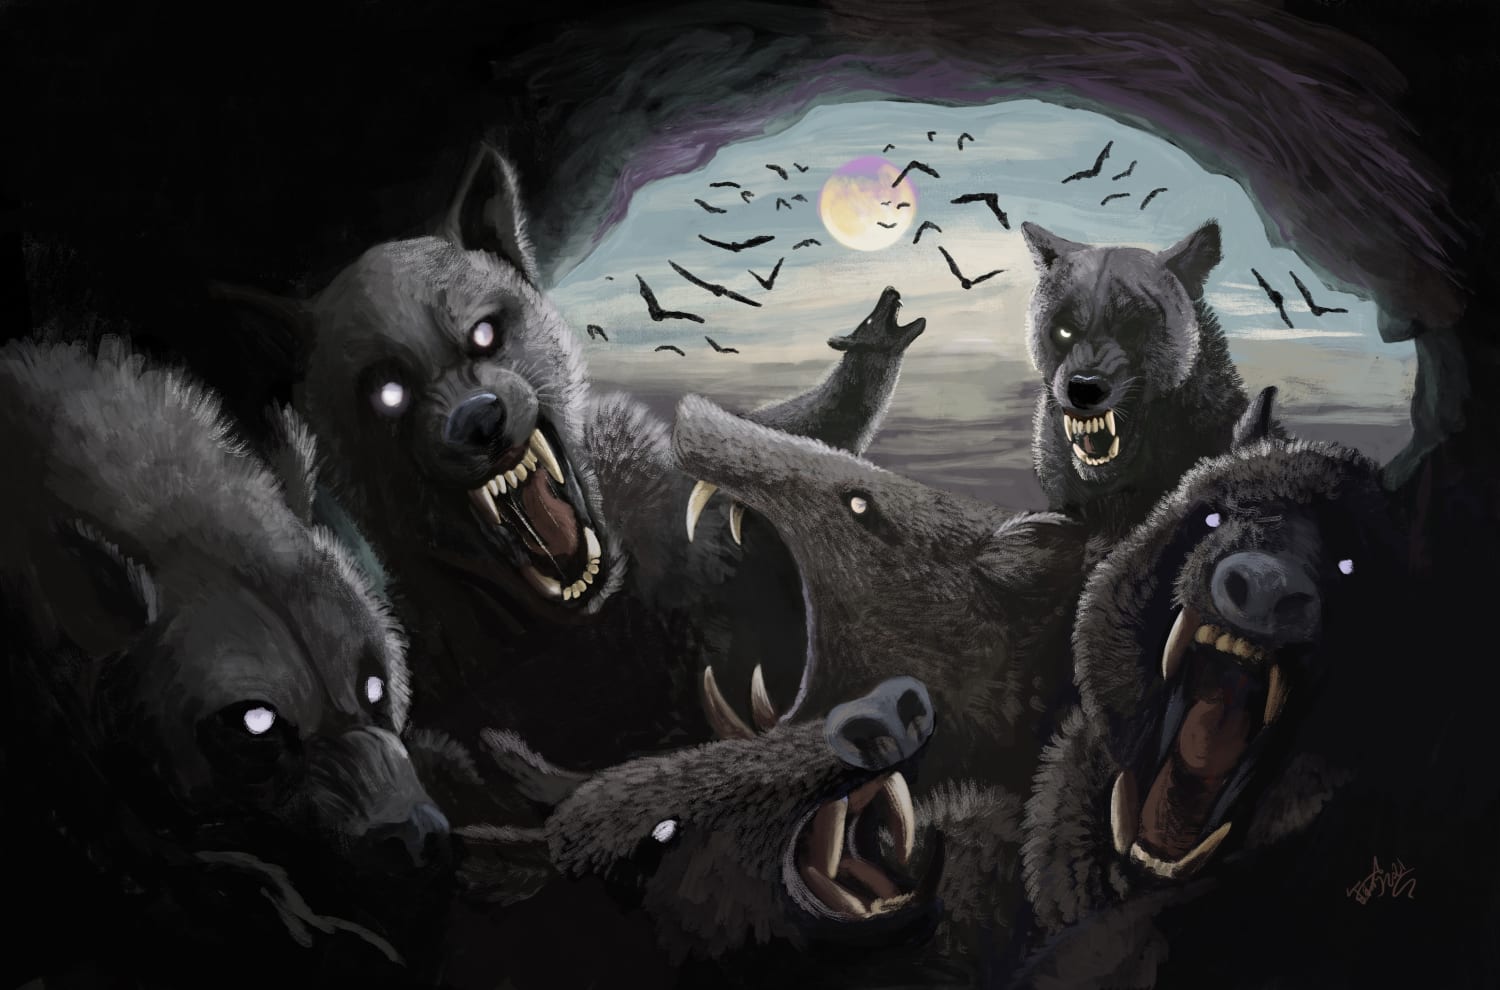 A Pack Of Dire Wolves Hunting Flat-Headed Peccaries Within An Ozark Mountains' Cave (Hodari Nundu- DeviantArt)